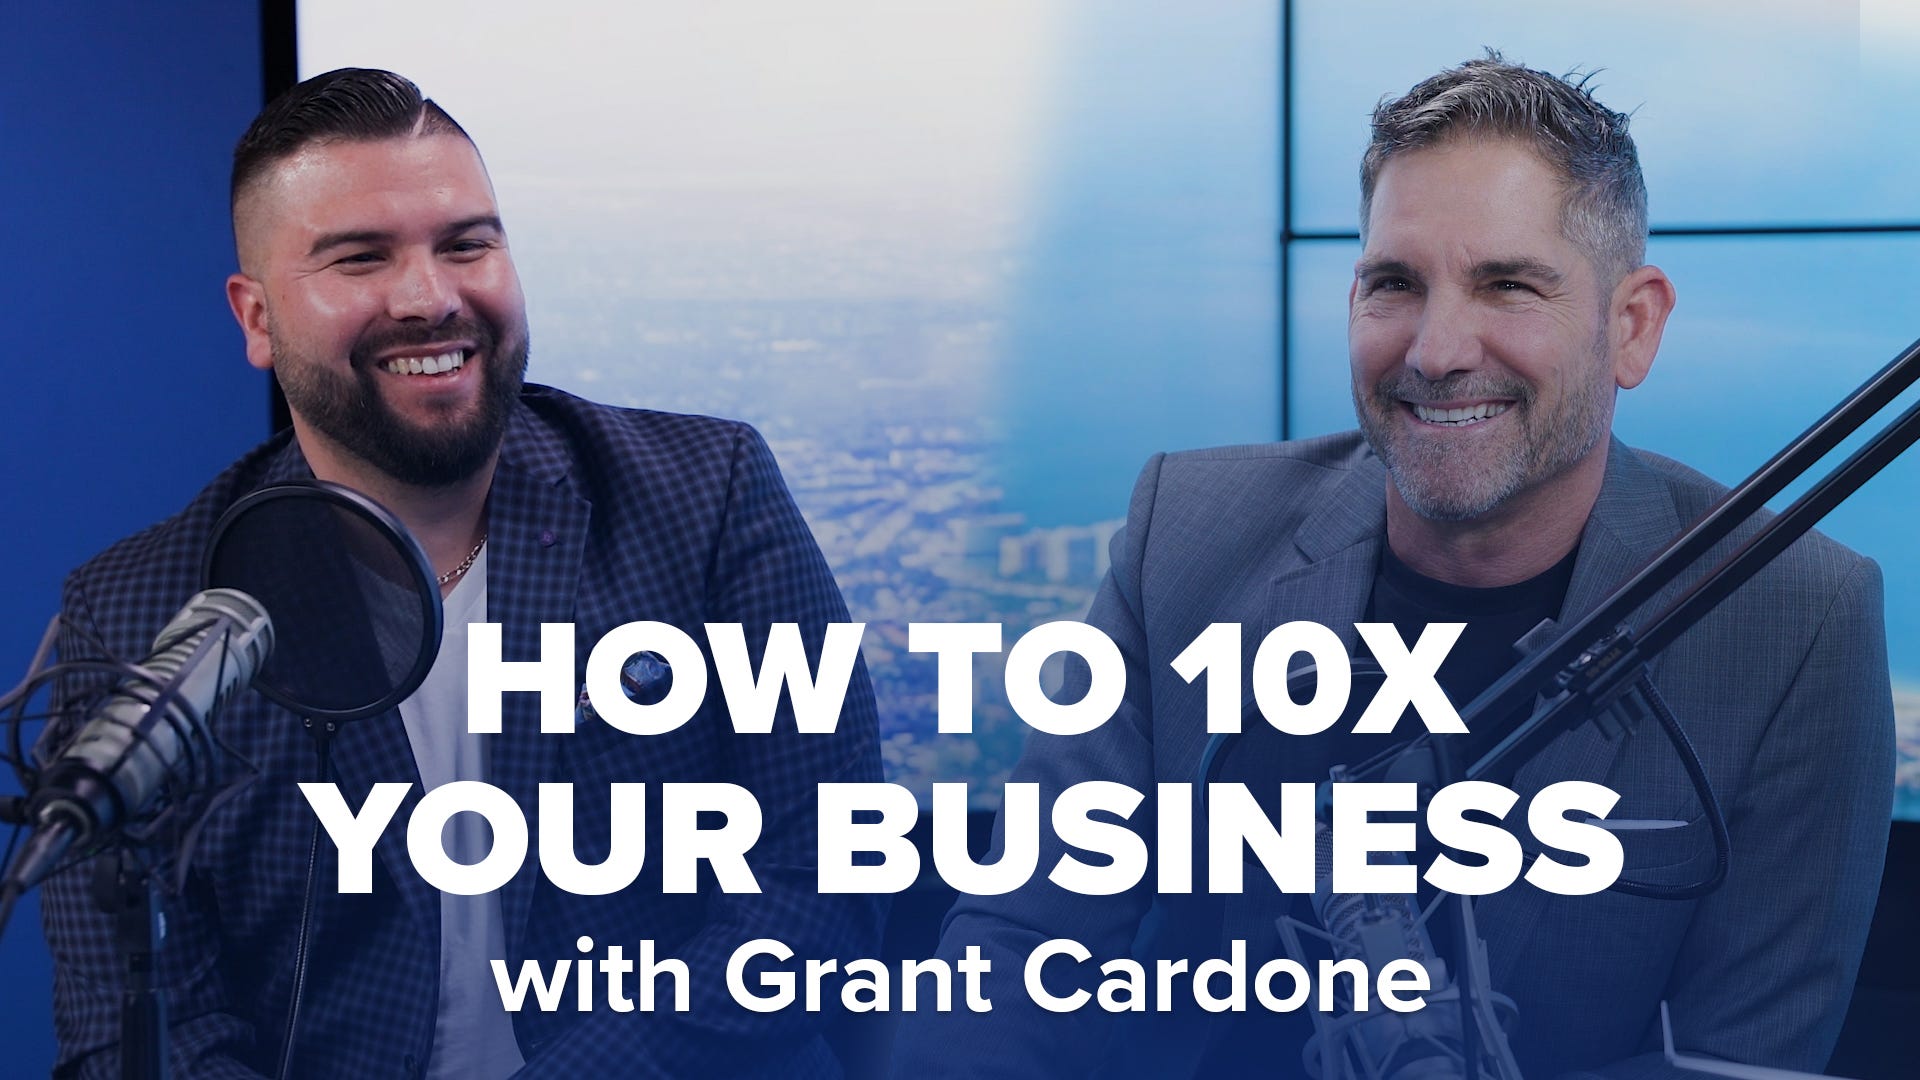 The 10X Growth Conference - The Manly Men blog